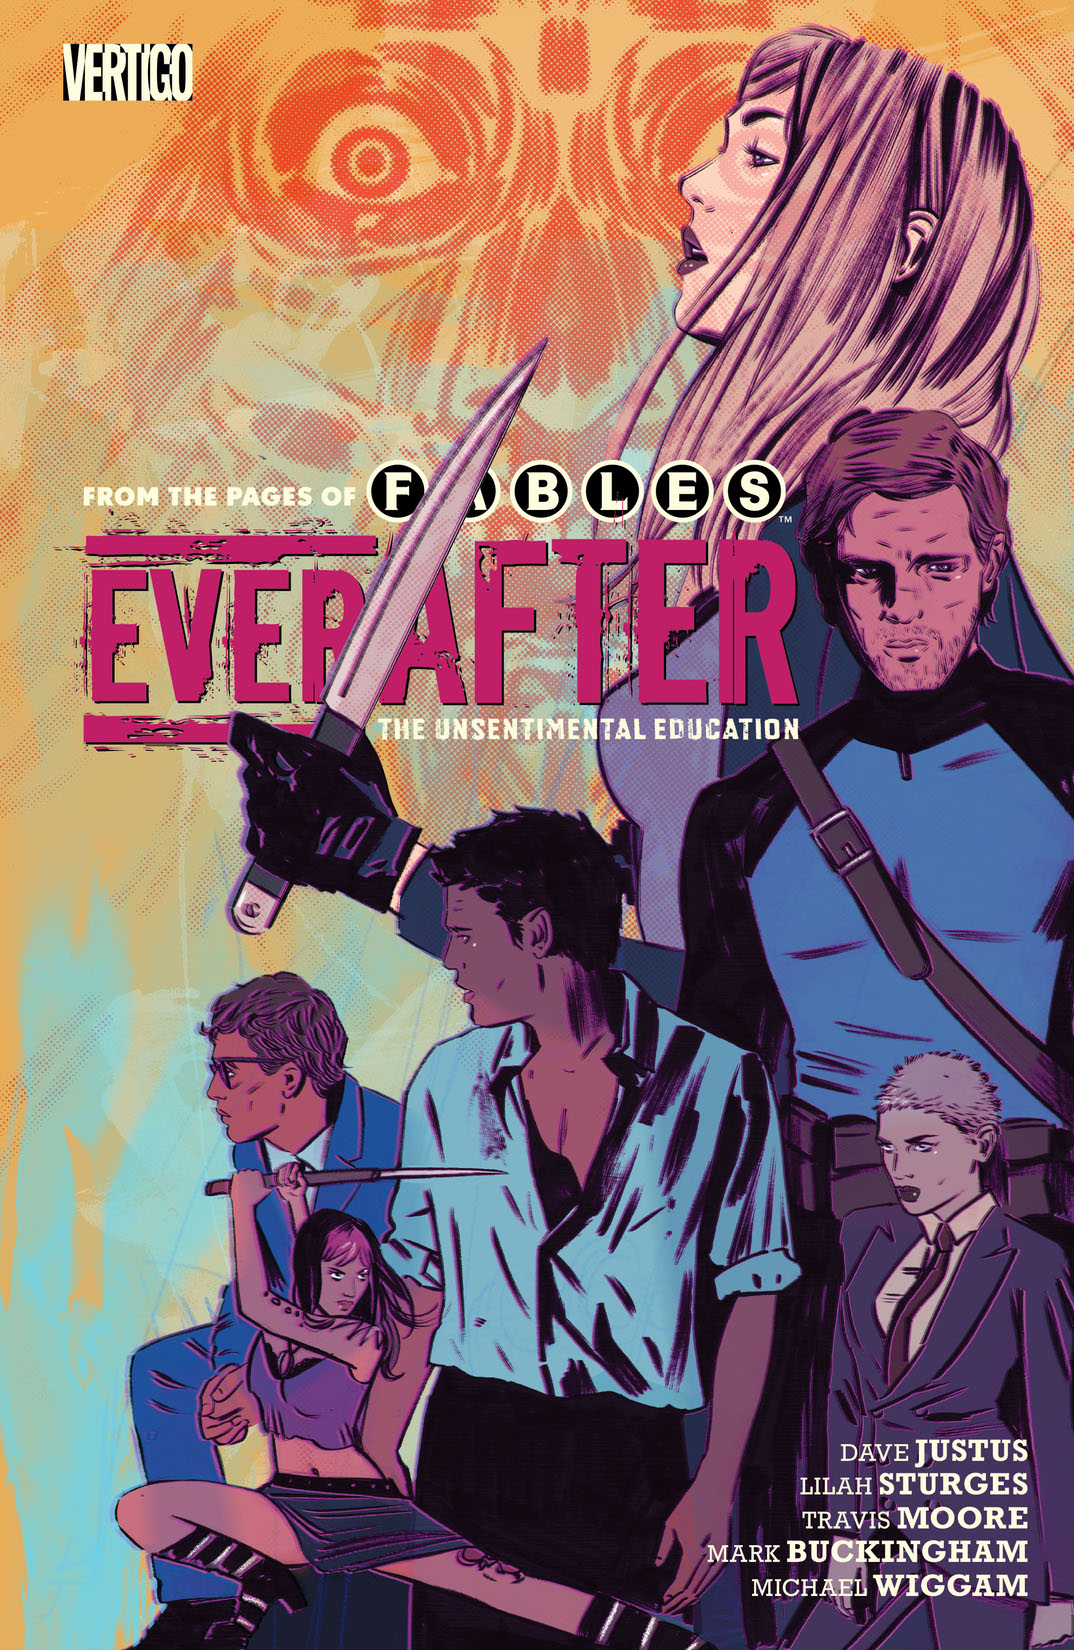 Everafter Vol. 2: The Unsentimental Education preview images